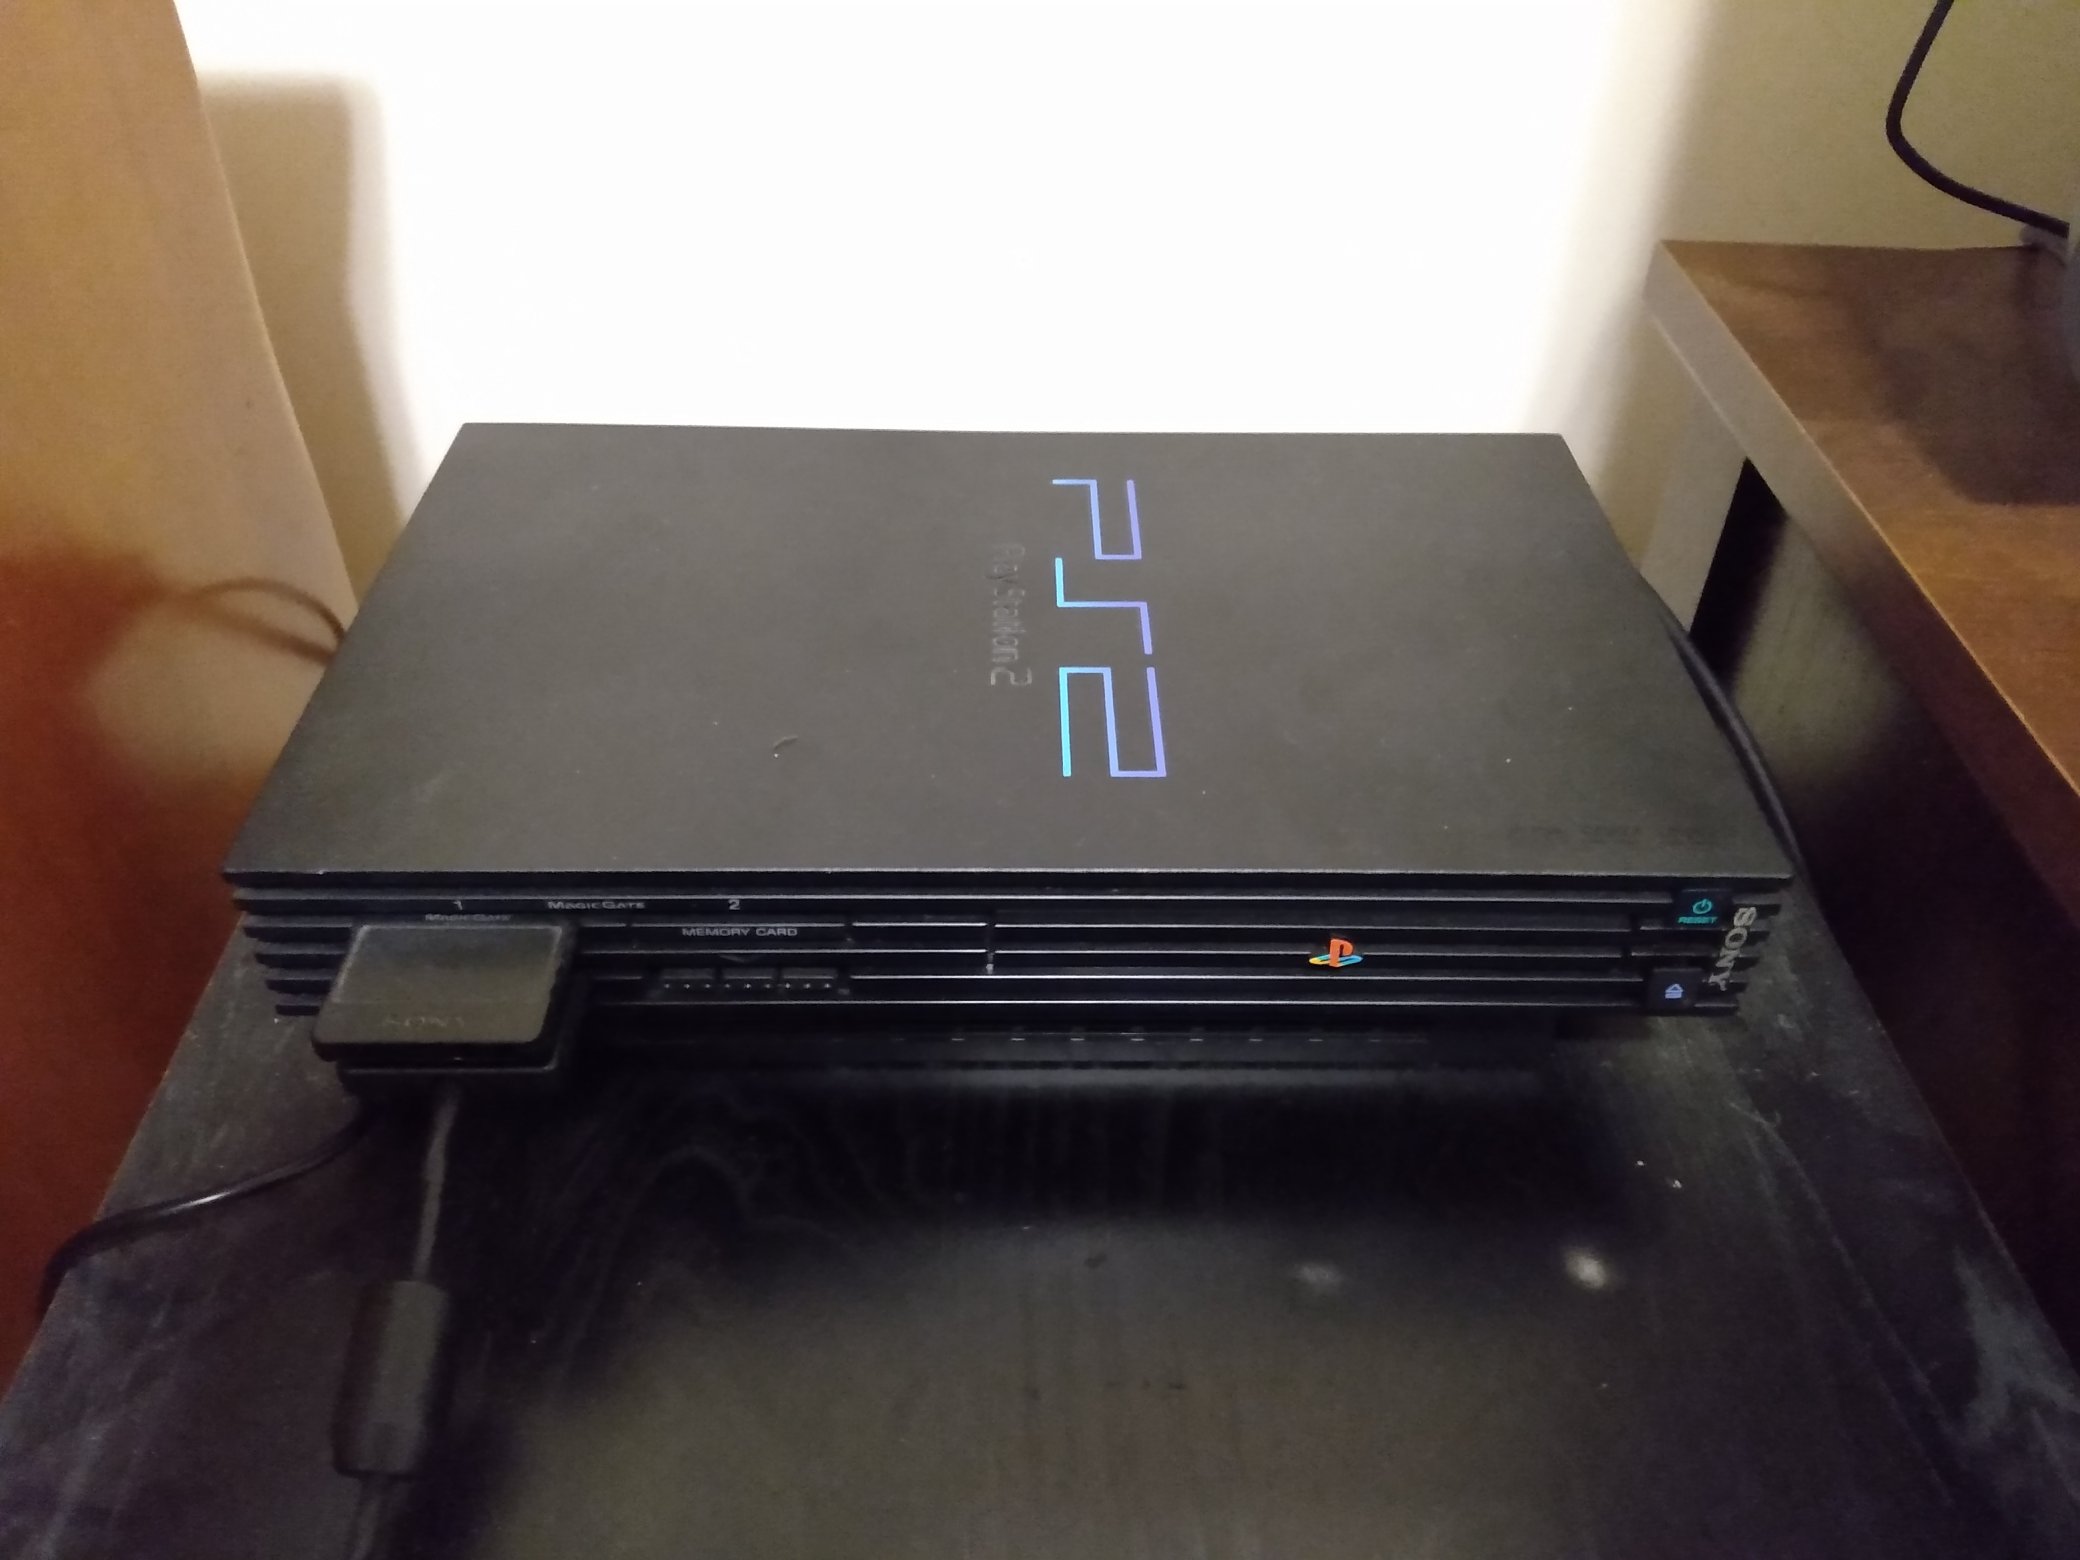 The PlayStation 2 Was Released 20 Years Ago Today 